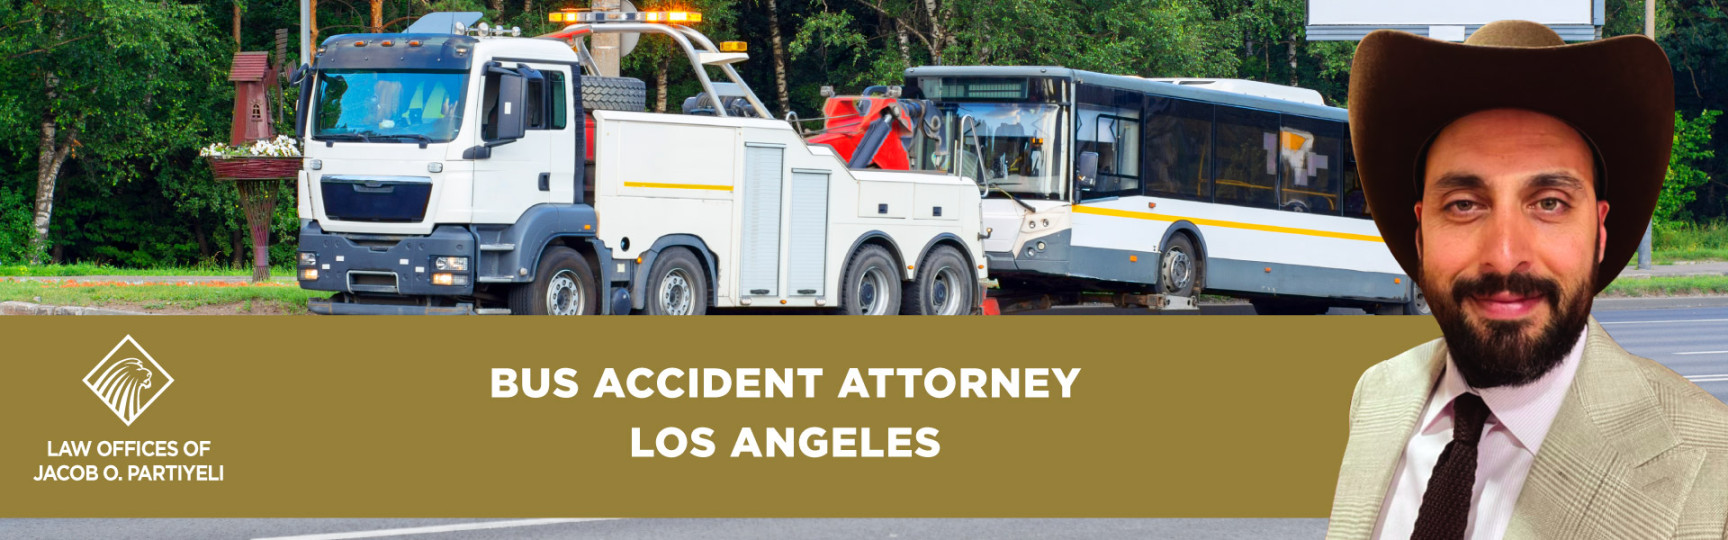 bus accident attorney los angeles